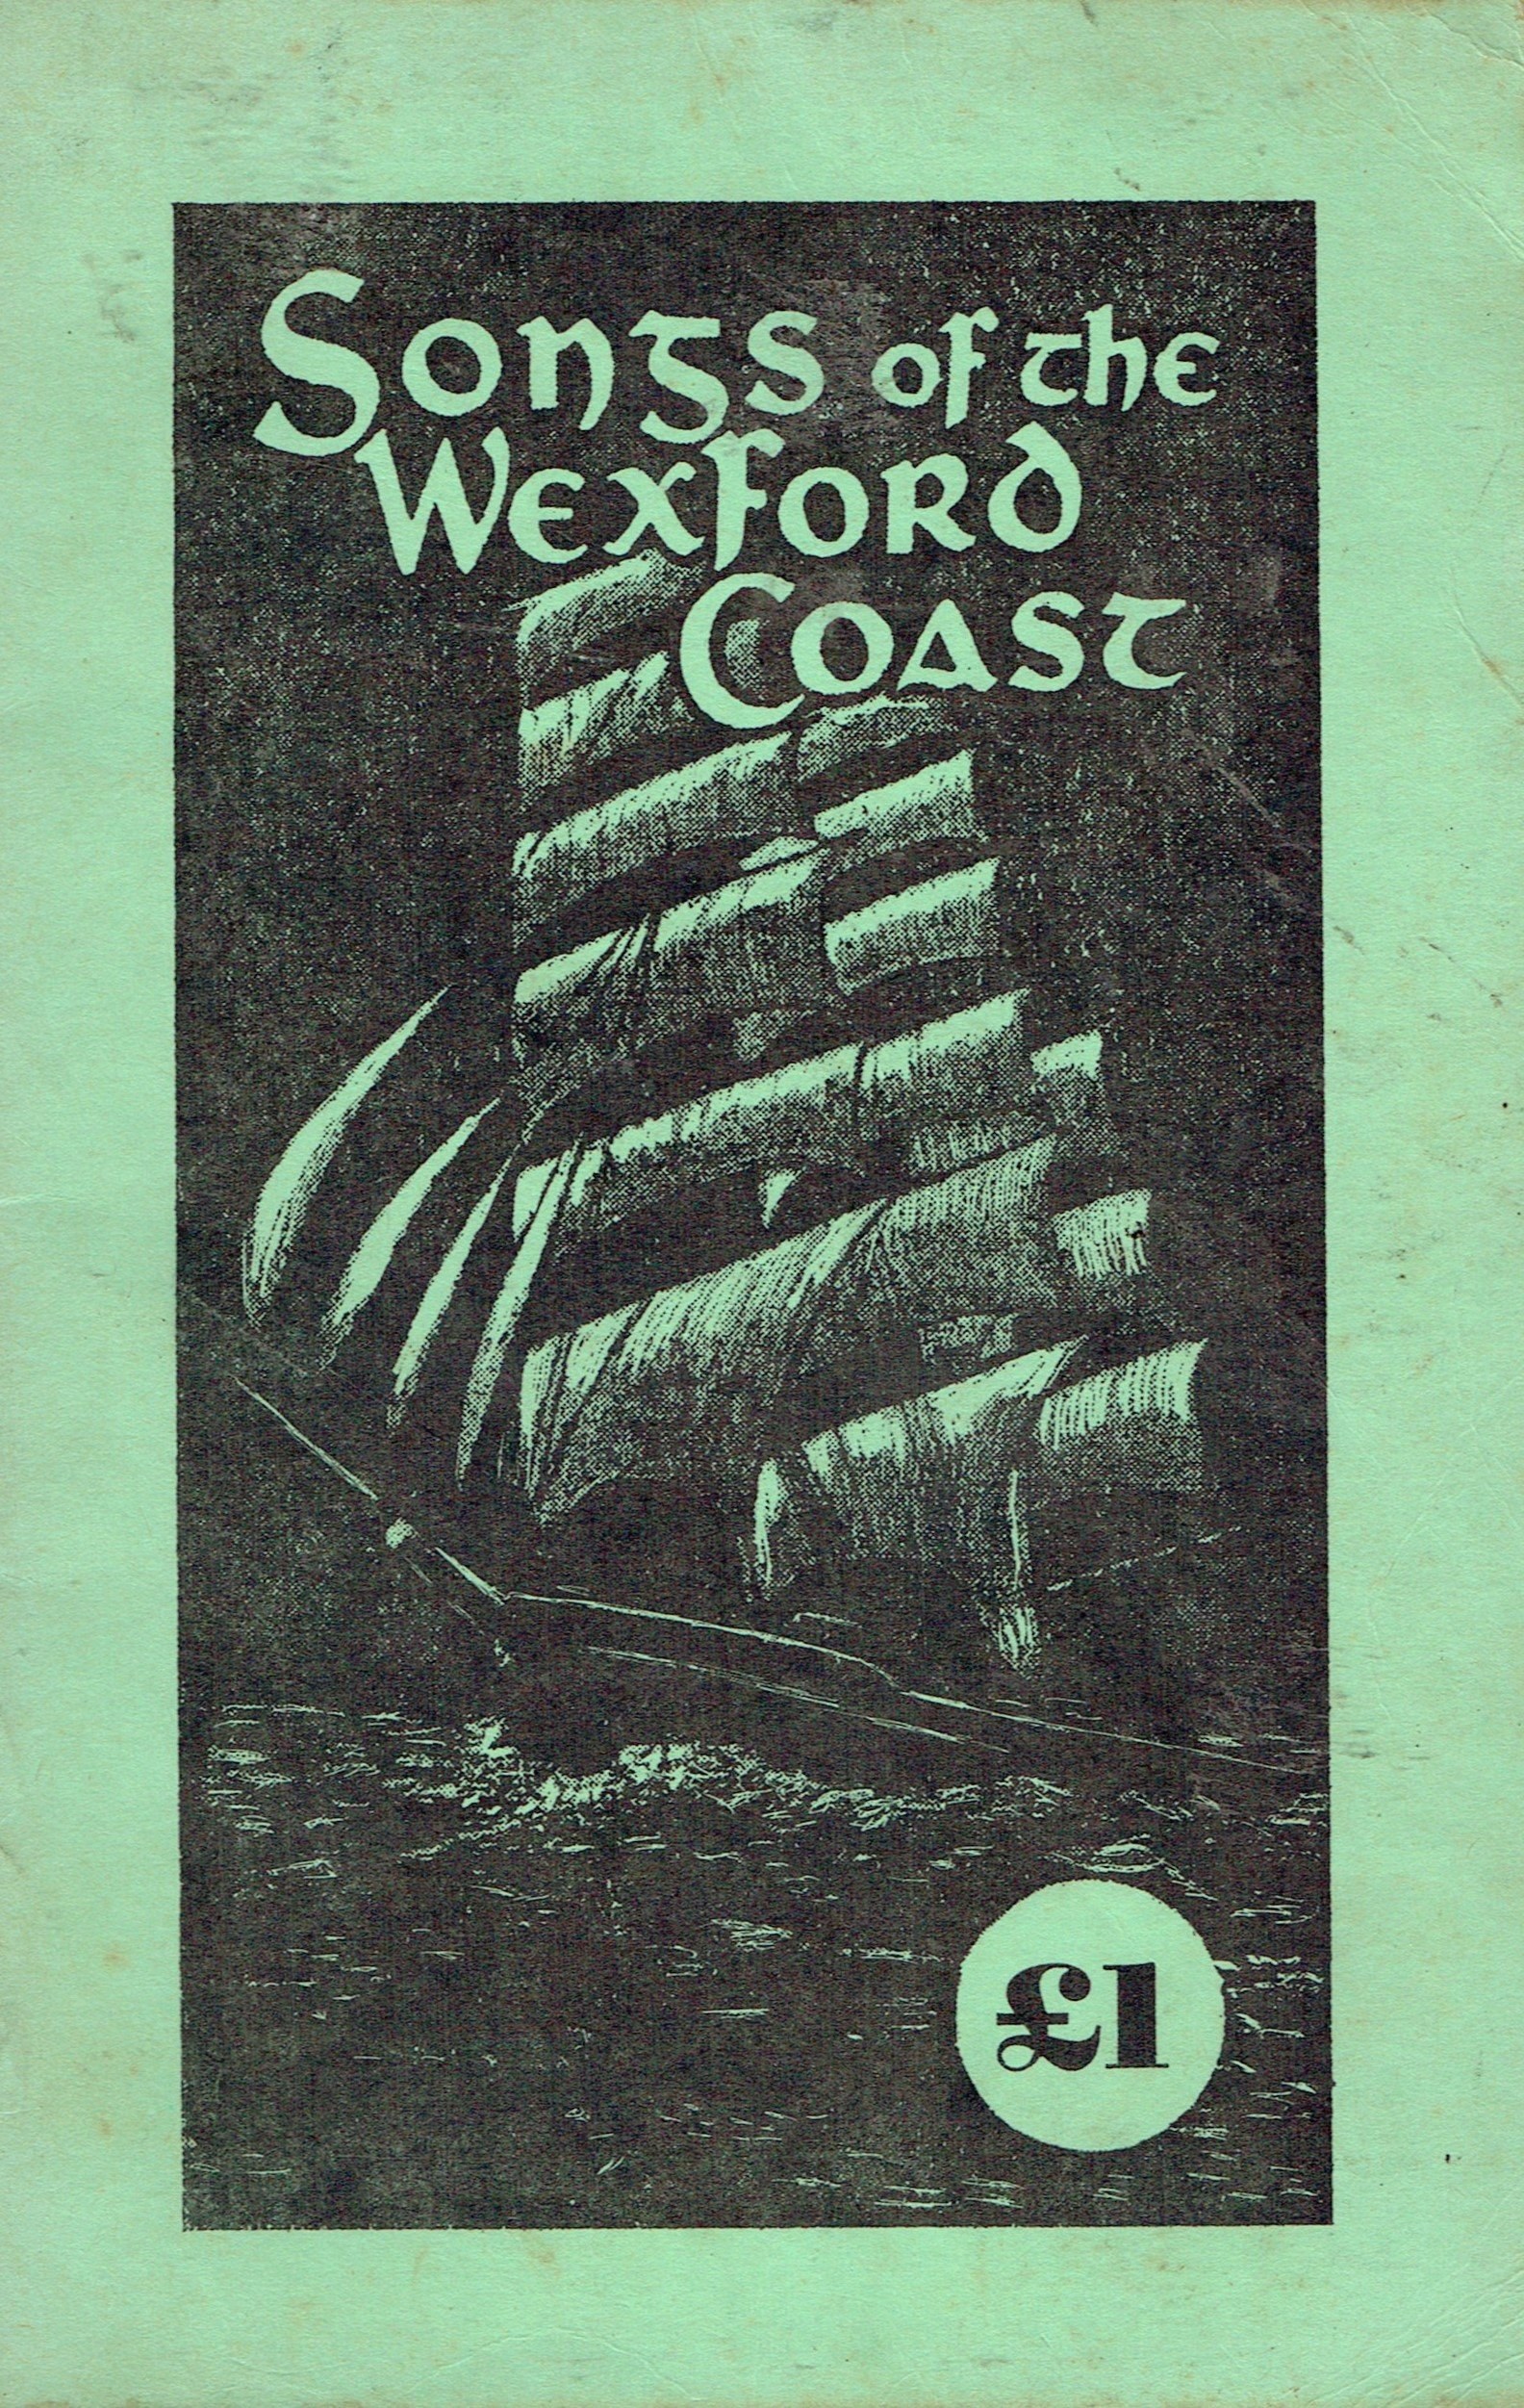 Songs of the Wexford Coast